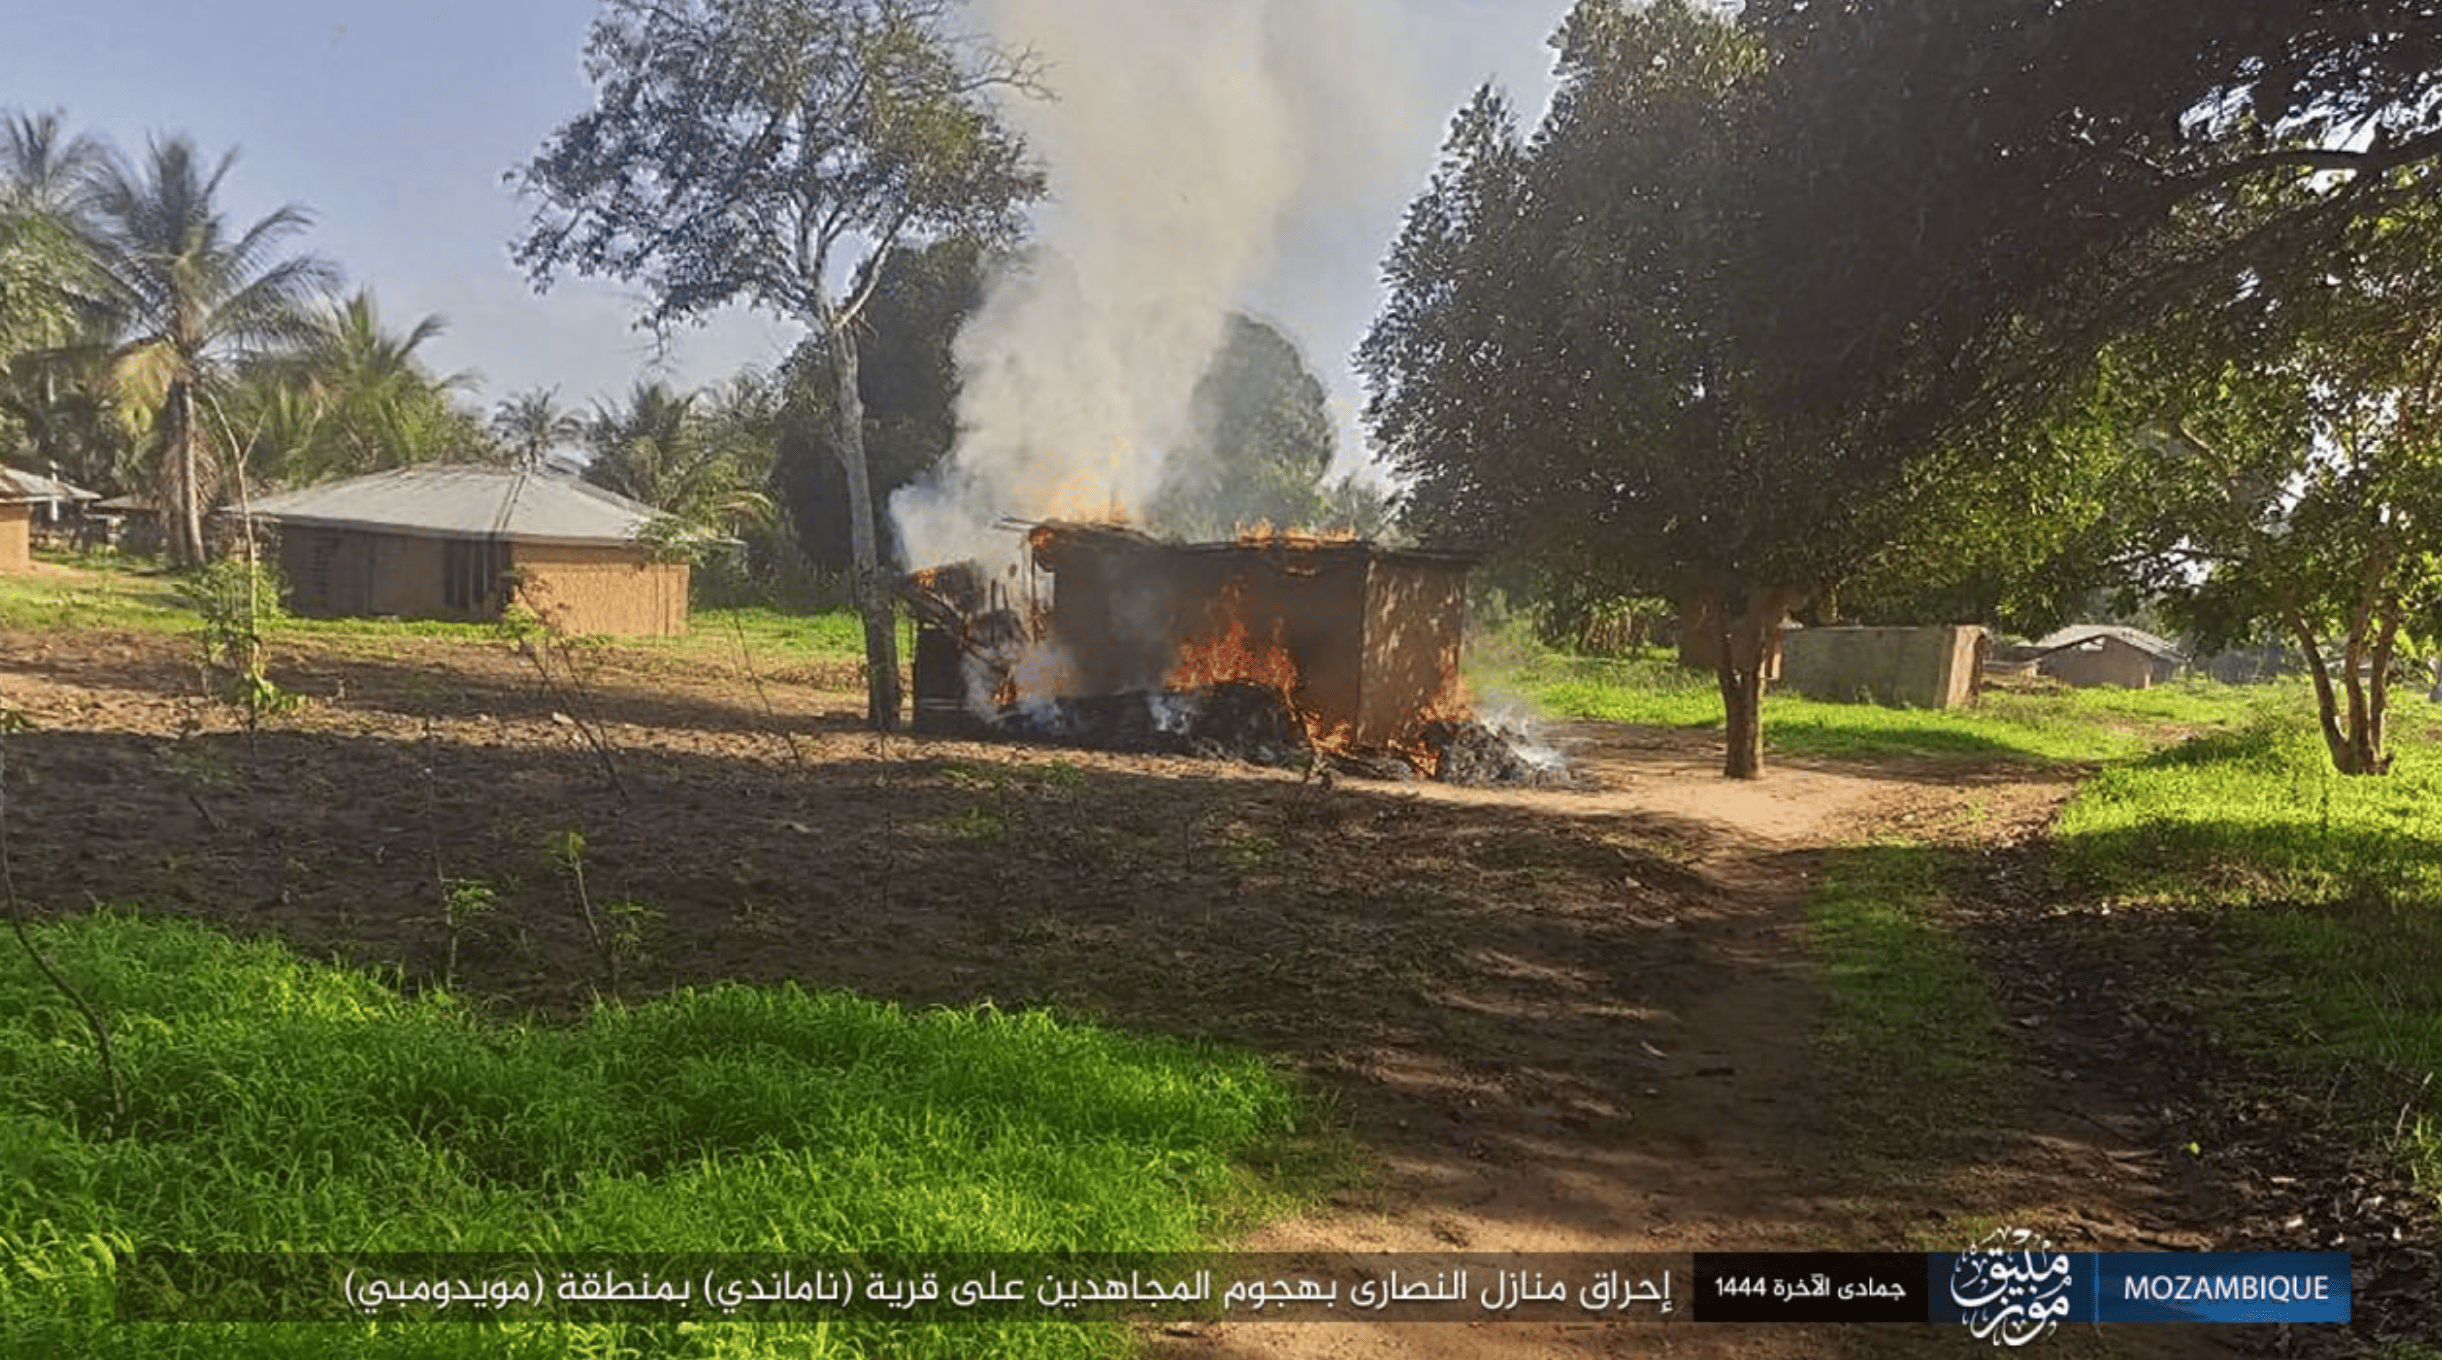 Islamic State (Shabaab Cult) Militants Armed Assault, Raze Homes and Behead One on the Christian Village of Namande, Muidumbe District, Cabo Delgado, Mozambique